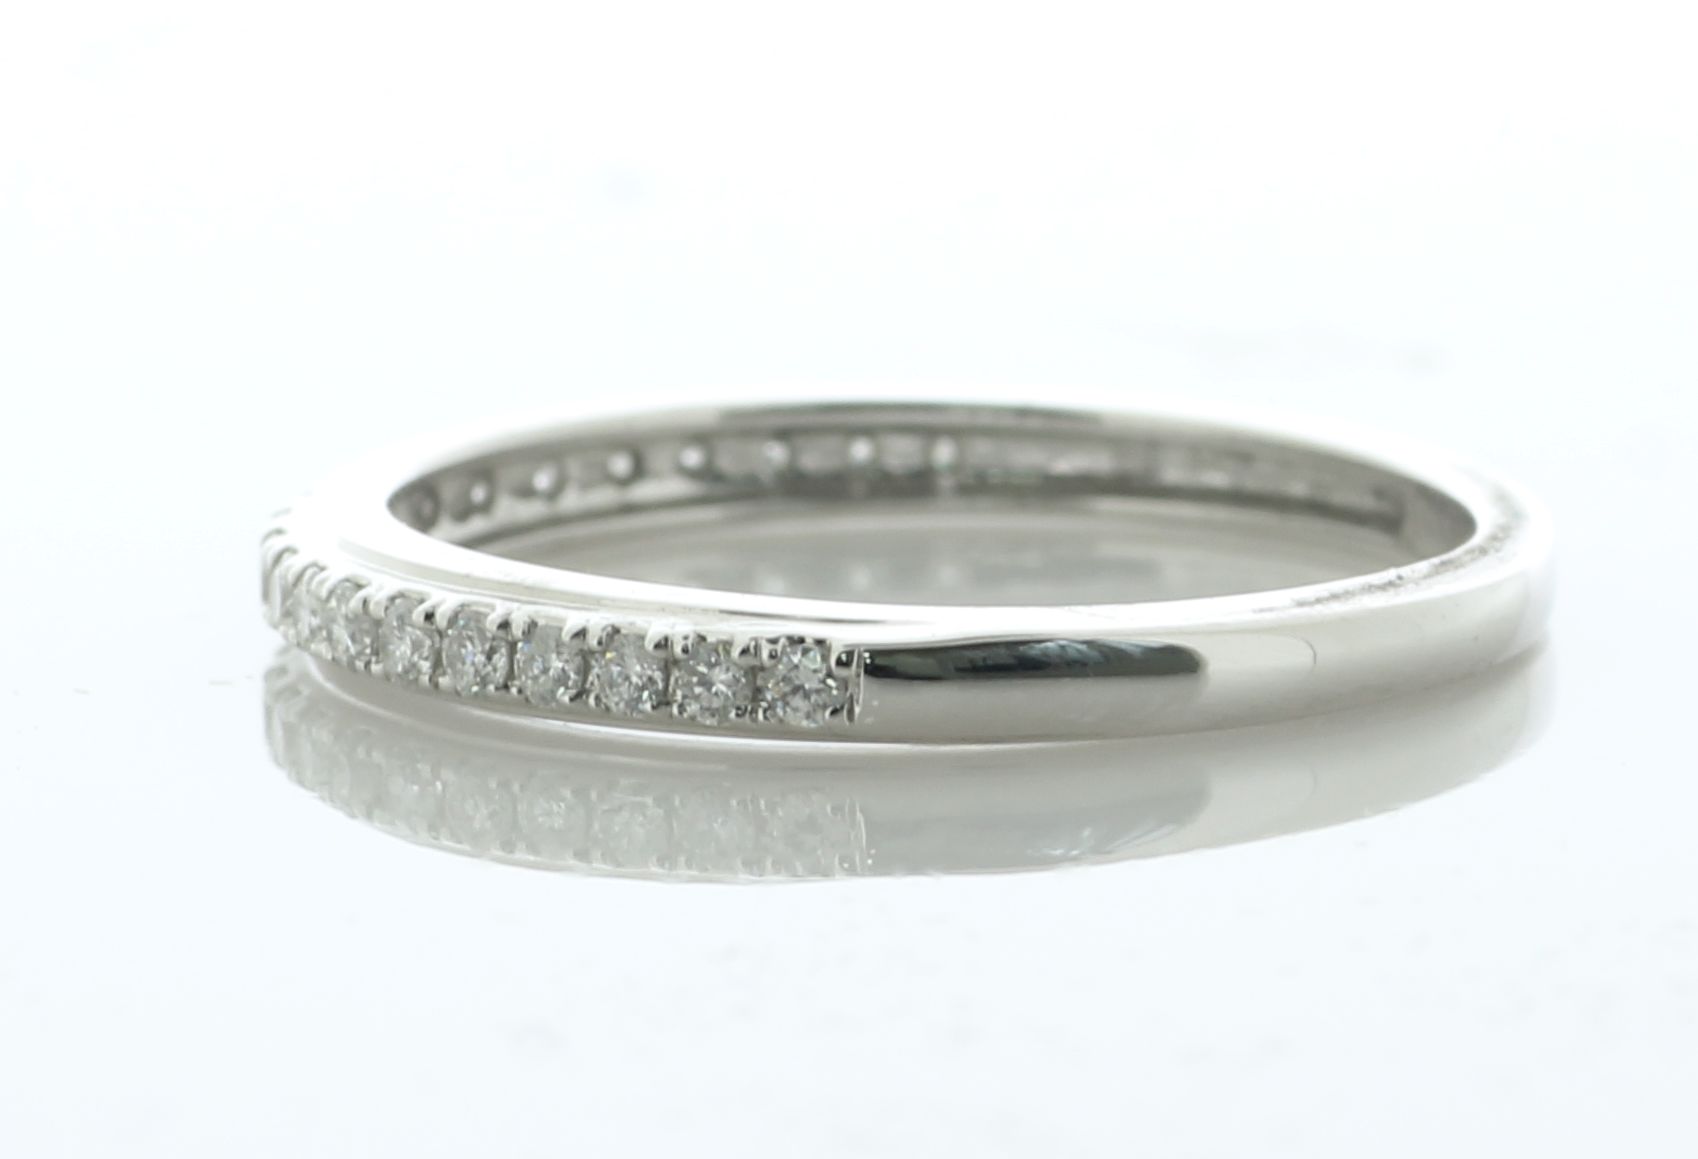 14ct White Gold Semi Eternity Diamond Ring 2mm 0.21 Carats - Valued By IDI £2,995.00 - This - Image 4 of 5